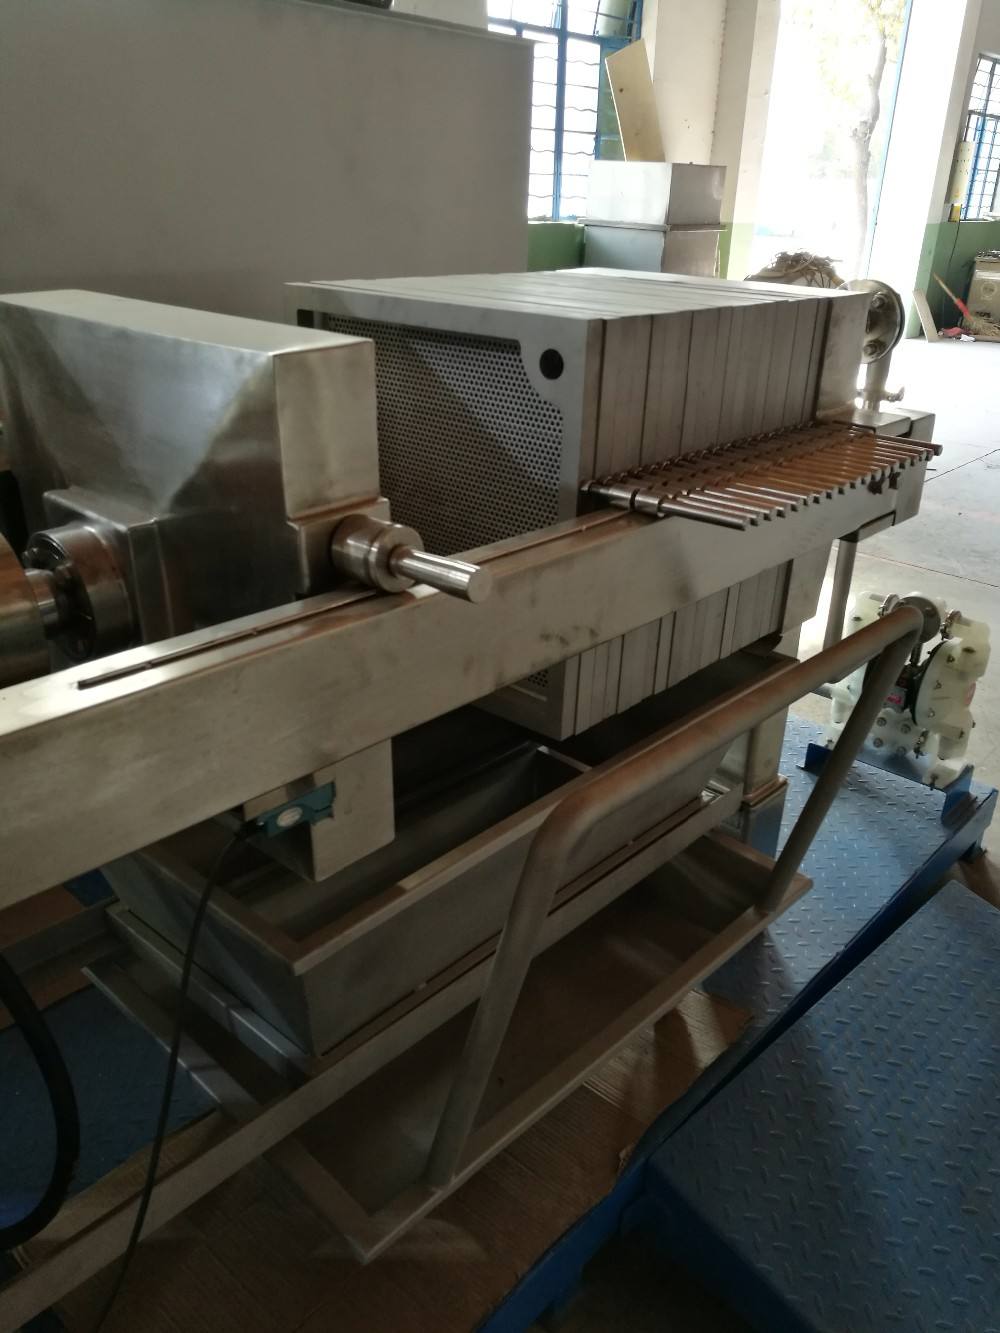 Mine oil filtration stainless steel filter press for laboratory